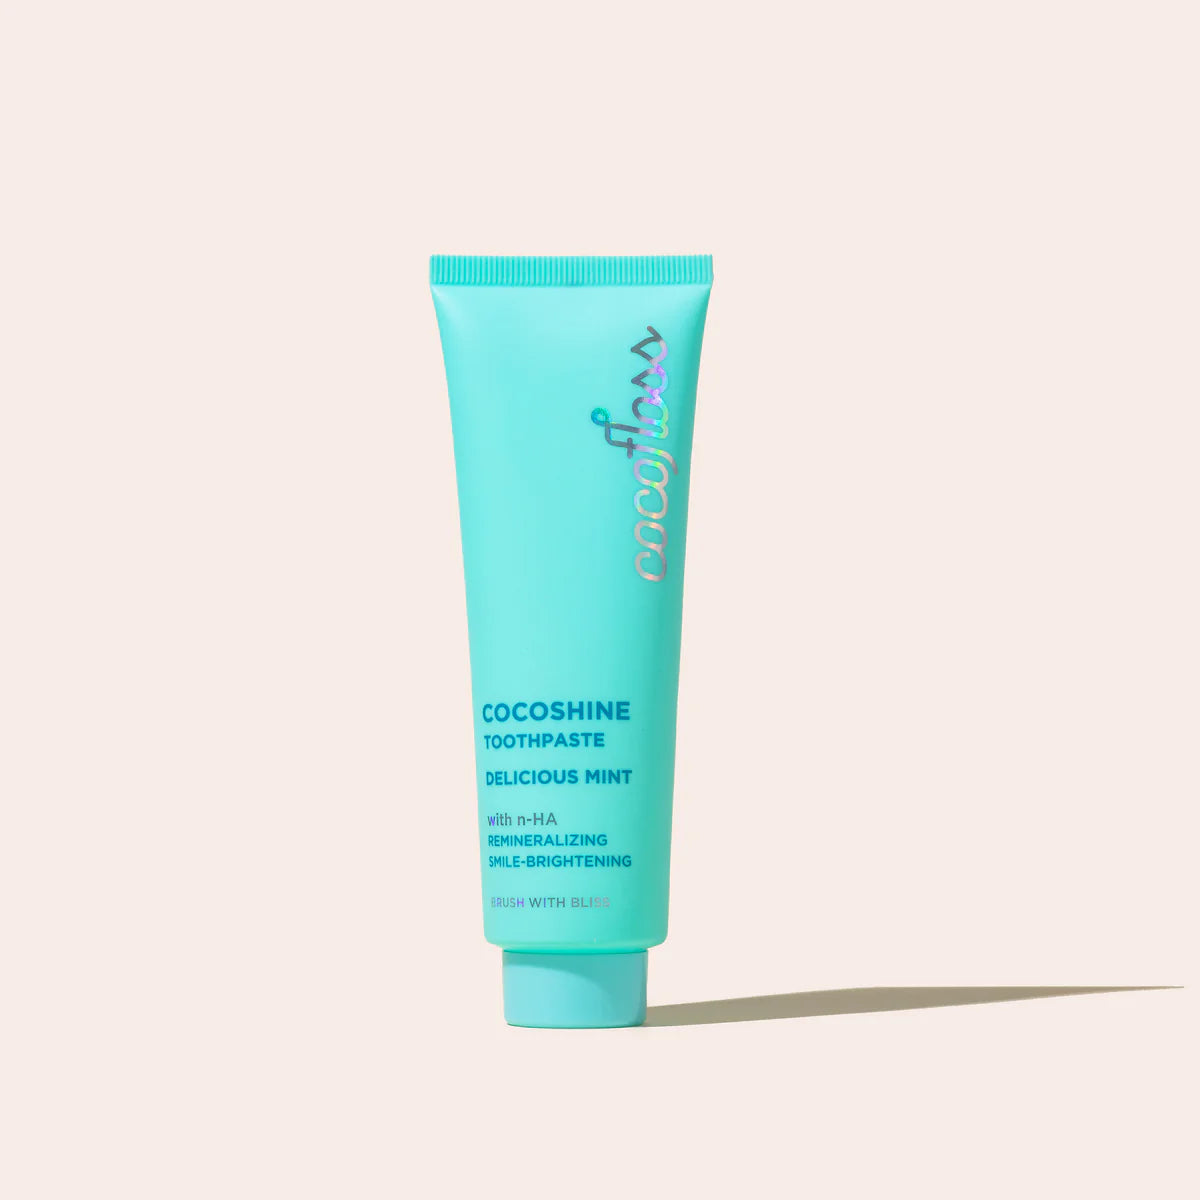 Cocoshine Toothpaste by Cocofloss 96ml